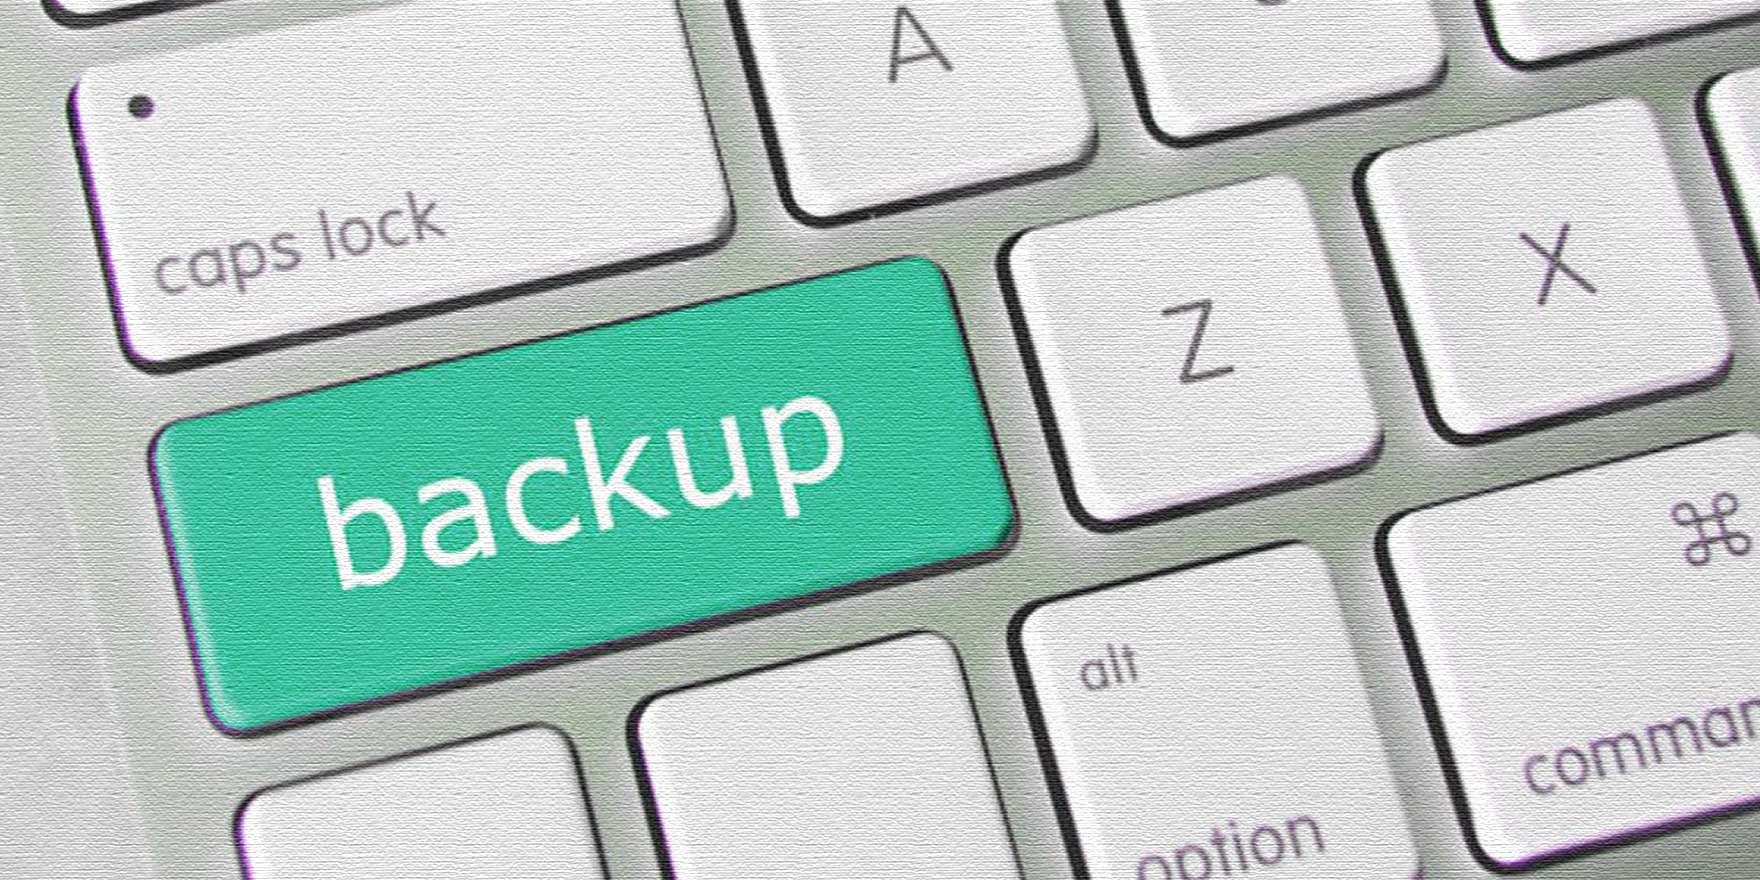 Learn more about Website Backup Shell Script